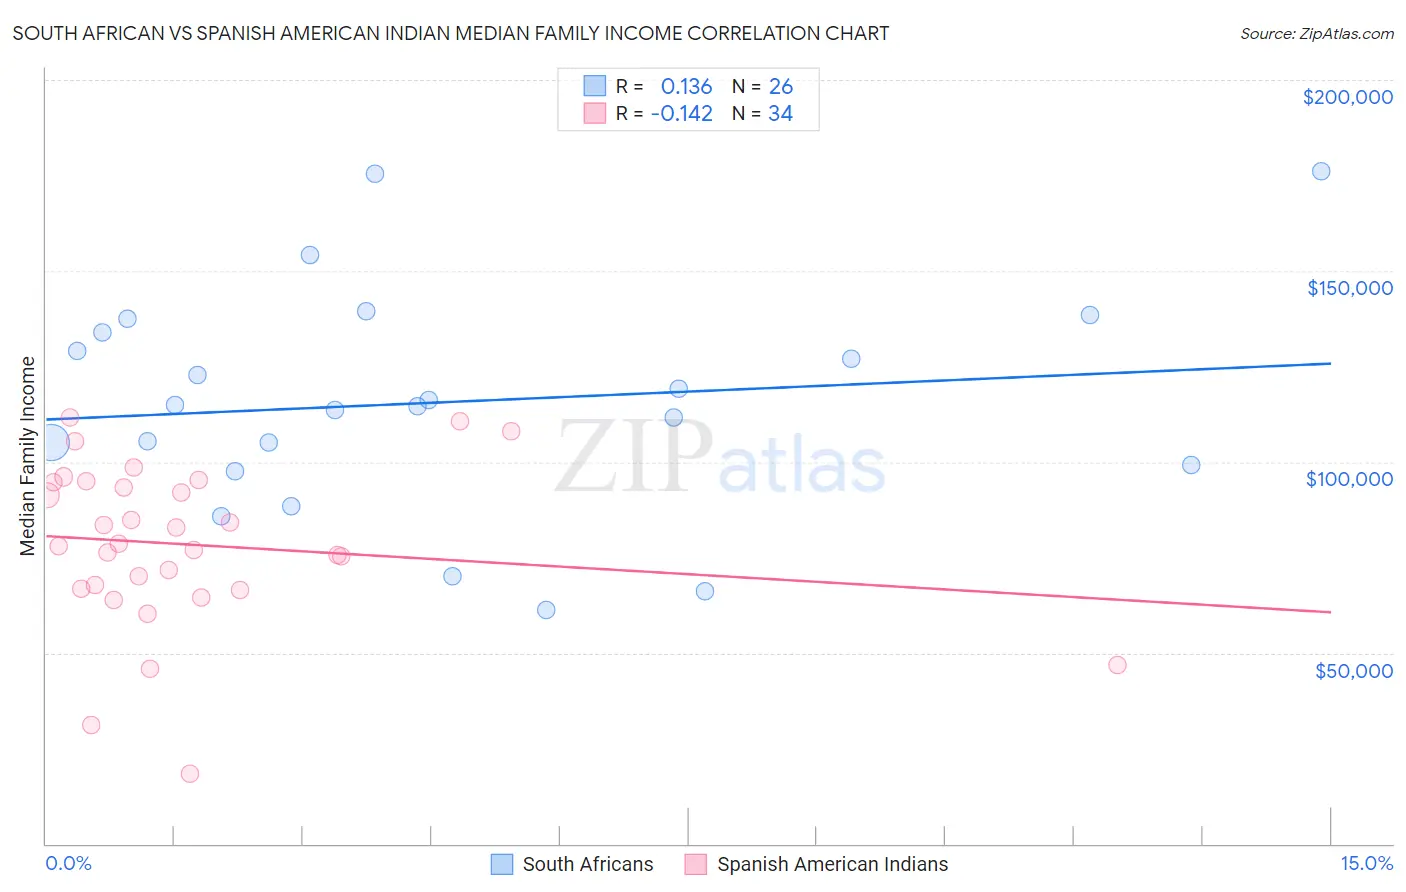 South African vs Spanish American Indian Median Family Income